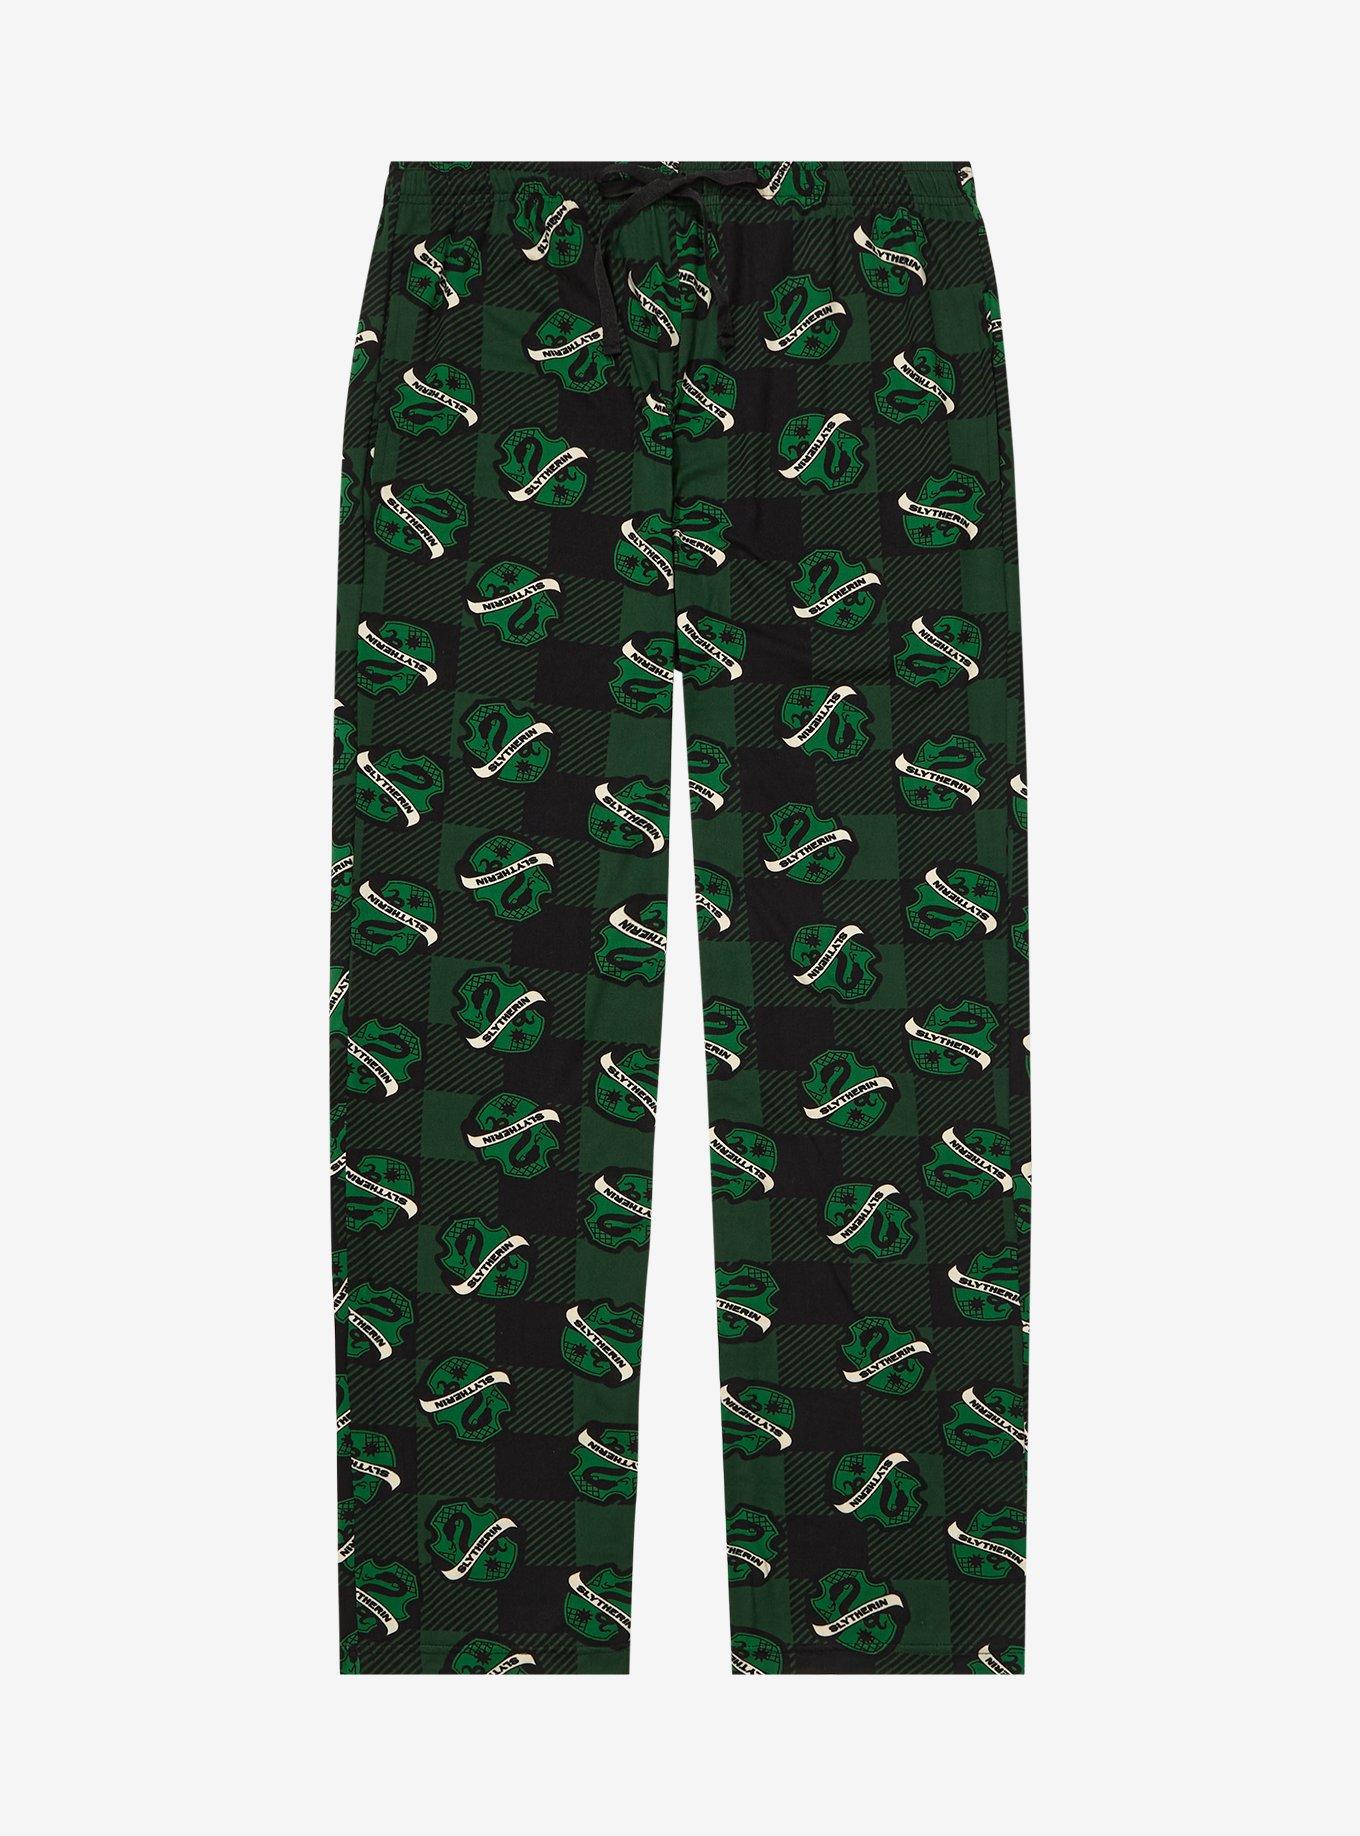 Harry Potter Plaid Slytherin Allover Print Sleep Pants - BoxLunch Exclusive, , hi-res